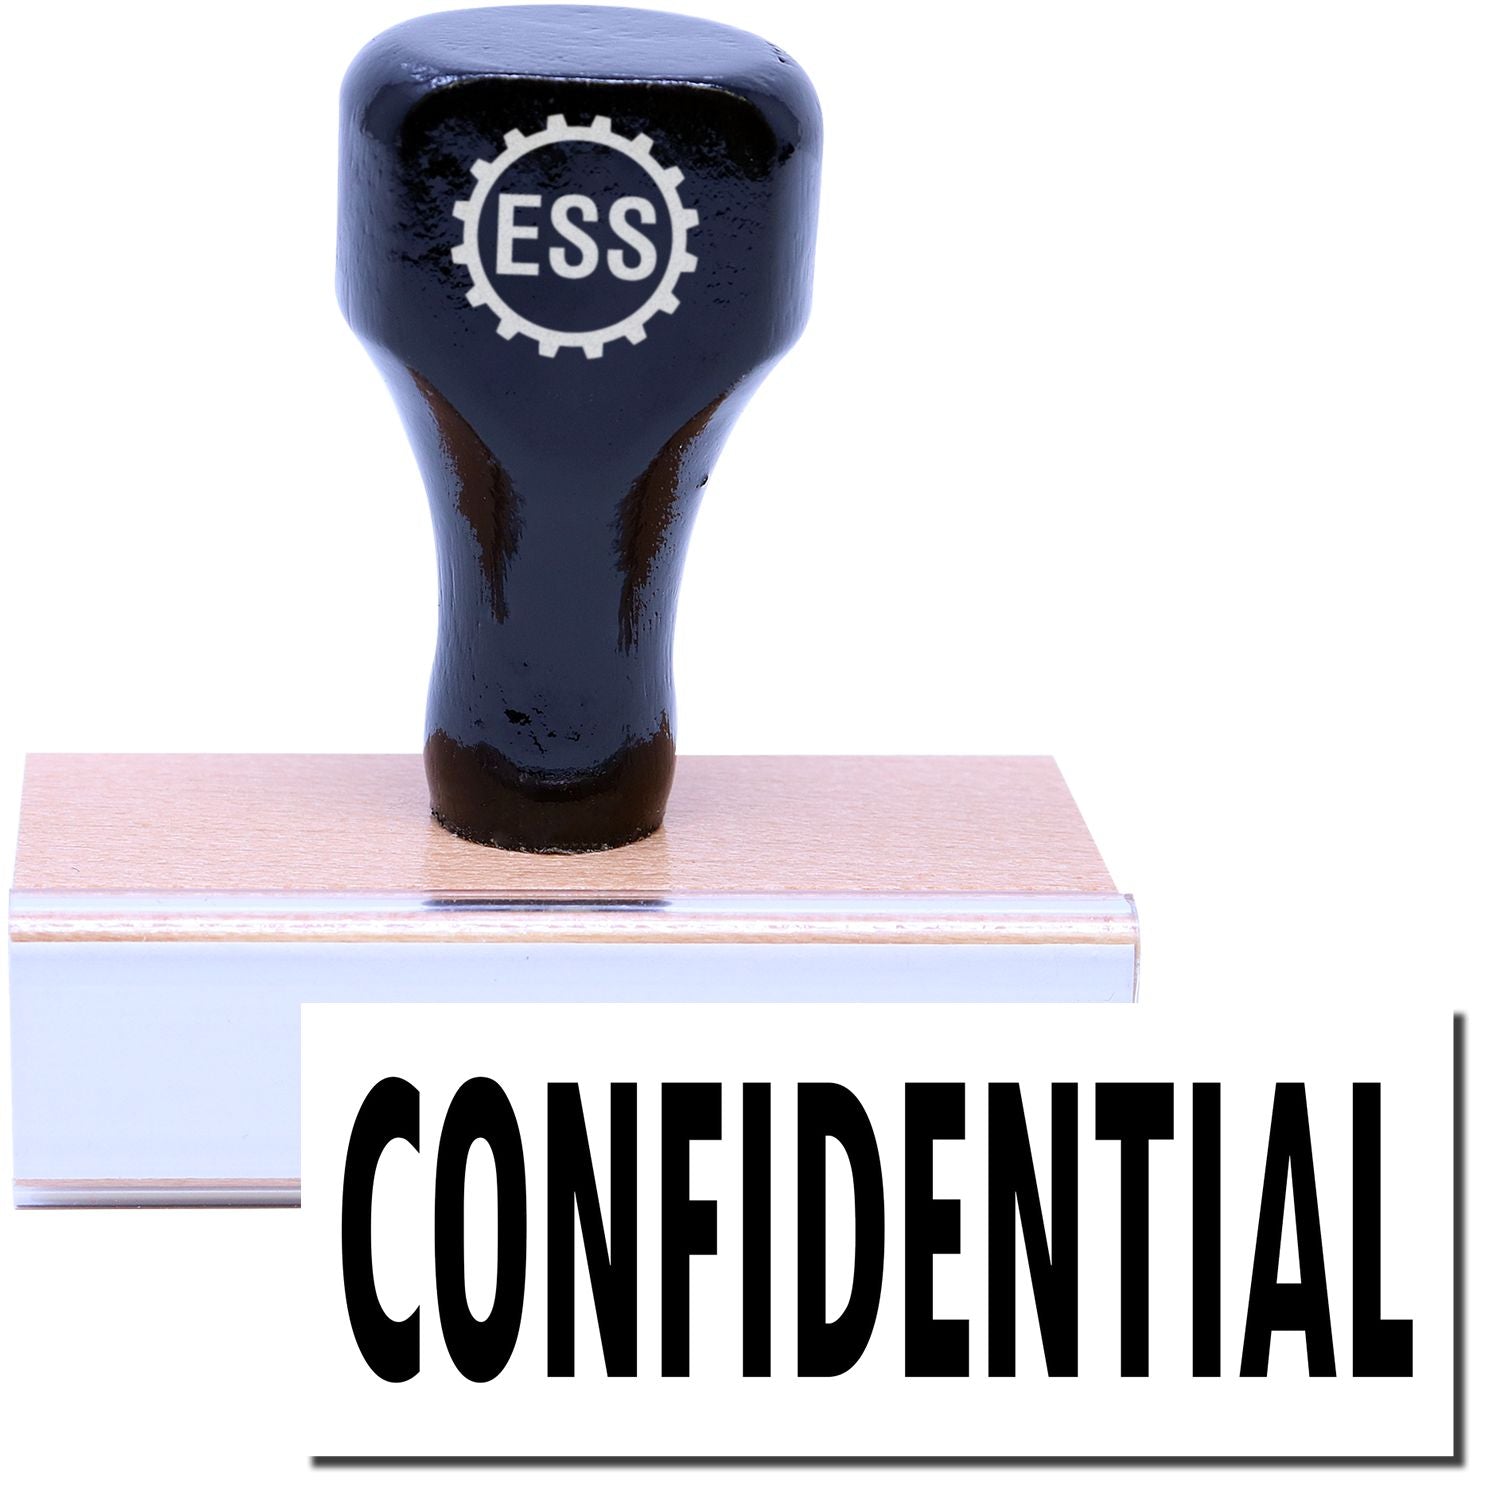 A stock office rubber stamp with a stamped image showing how the text "CONFIDENTIAL" in a large font is displayed after stamping.